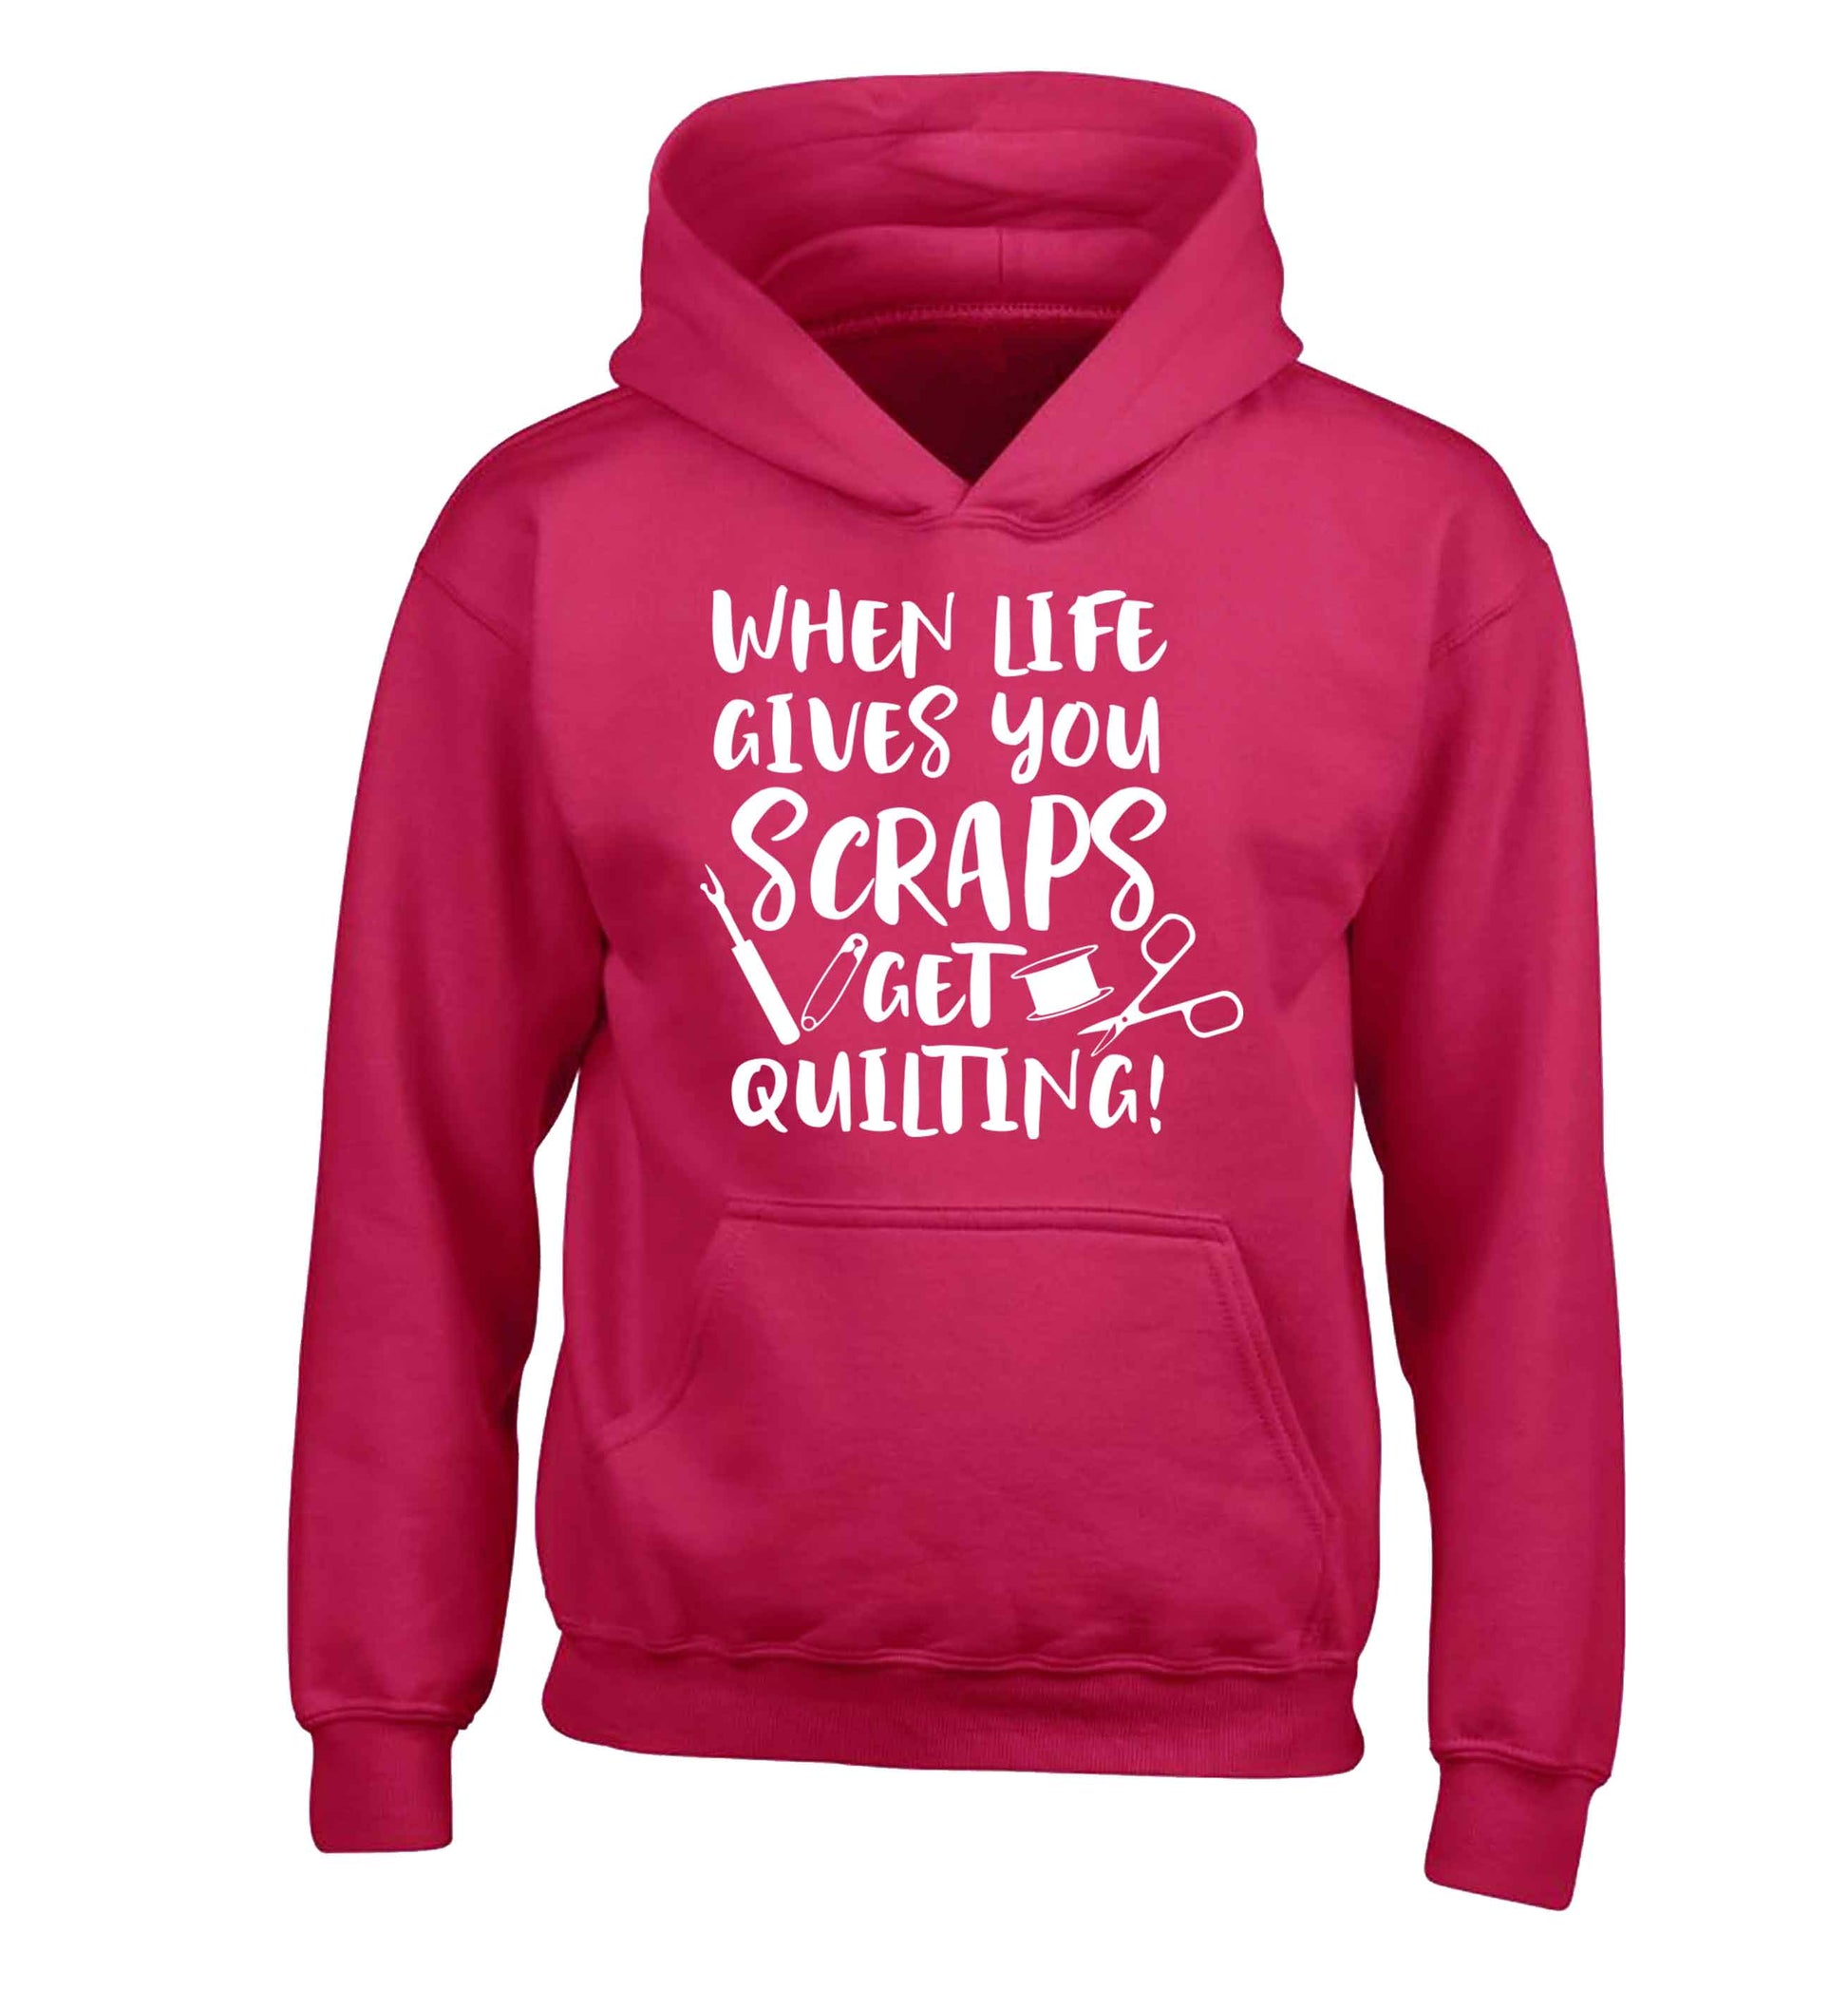 When life gives you scraps get quilting! children's pink hoodie 12-13 Years